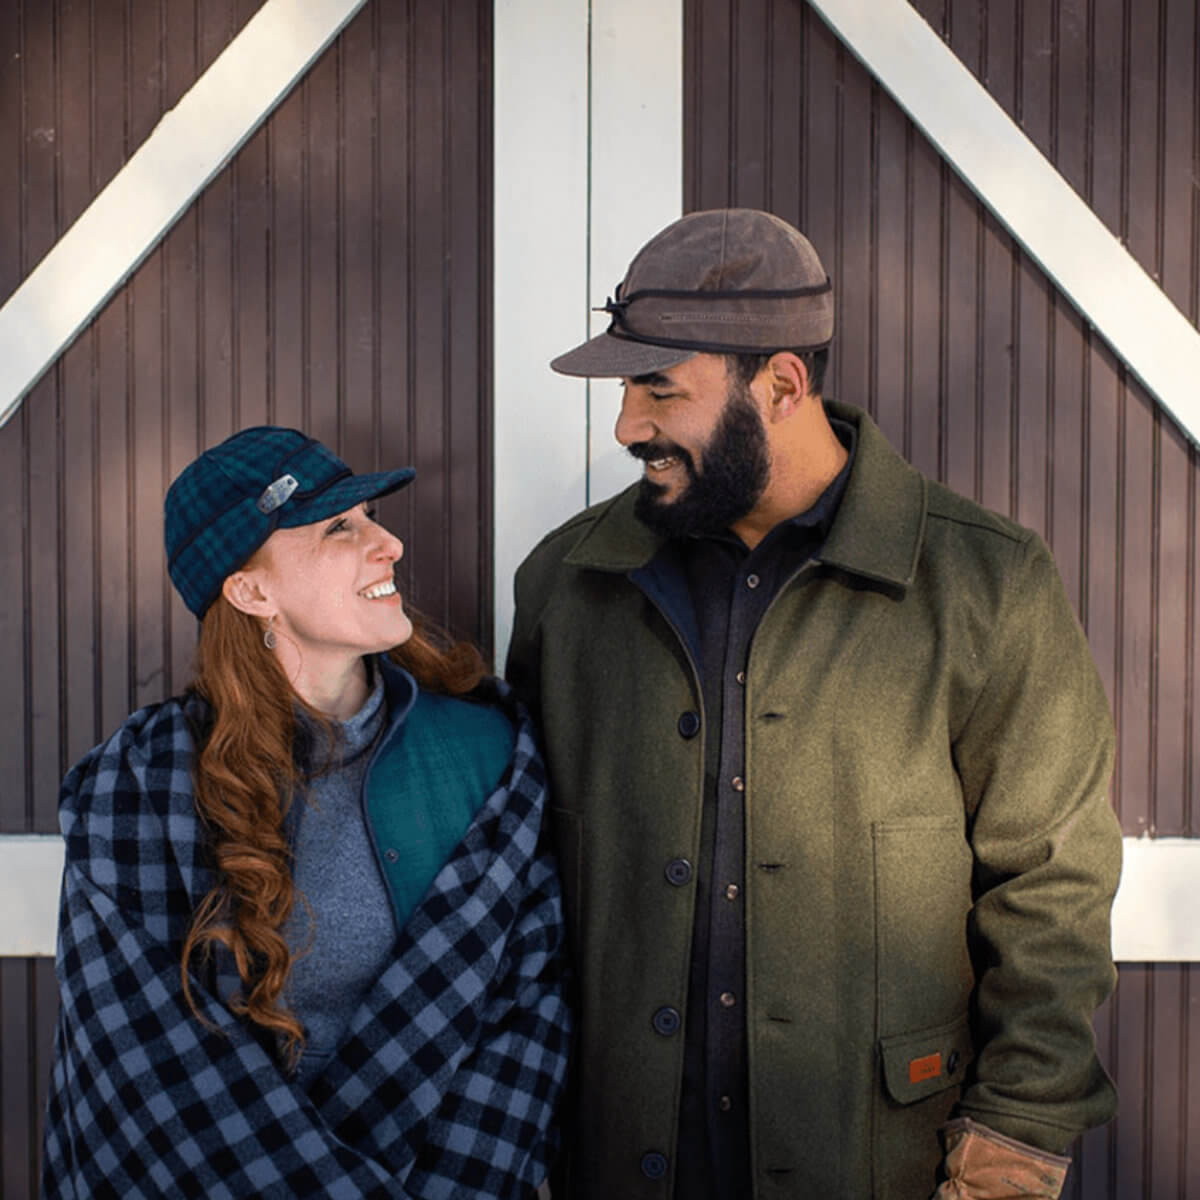 Stormy Kromer Insulated Waxed Cotton Cap